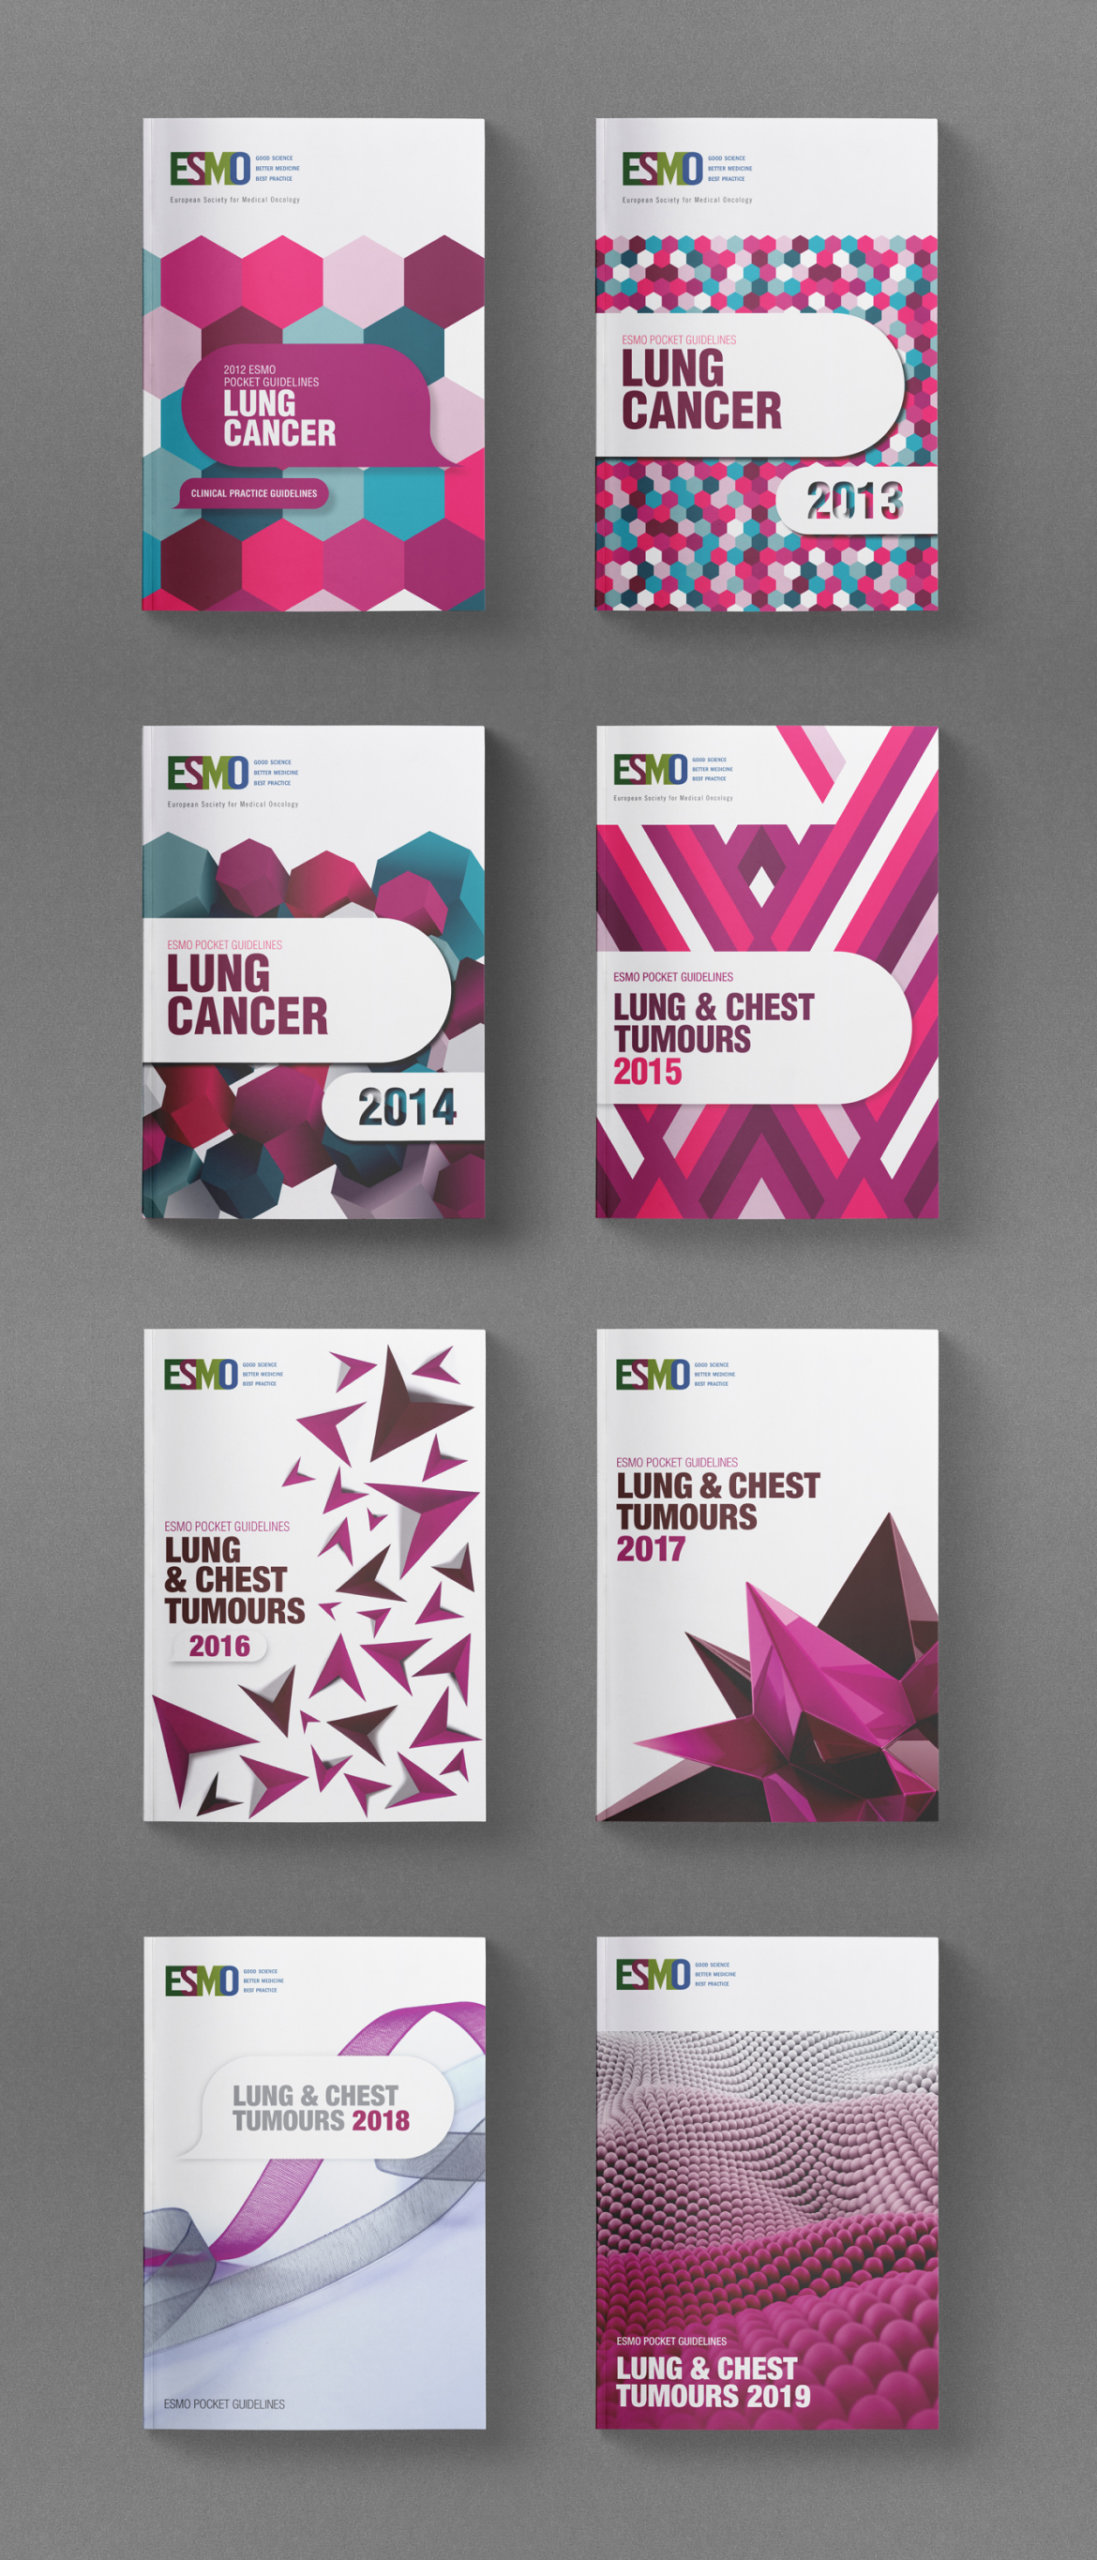 Esmo pocket guide covers medical writing services